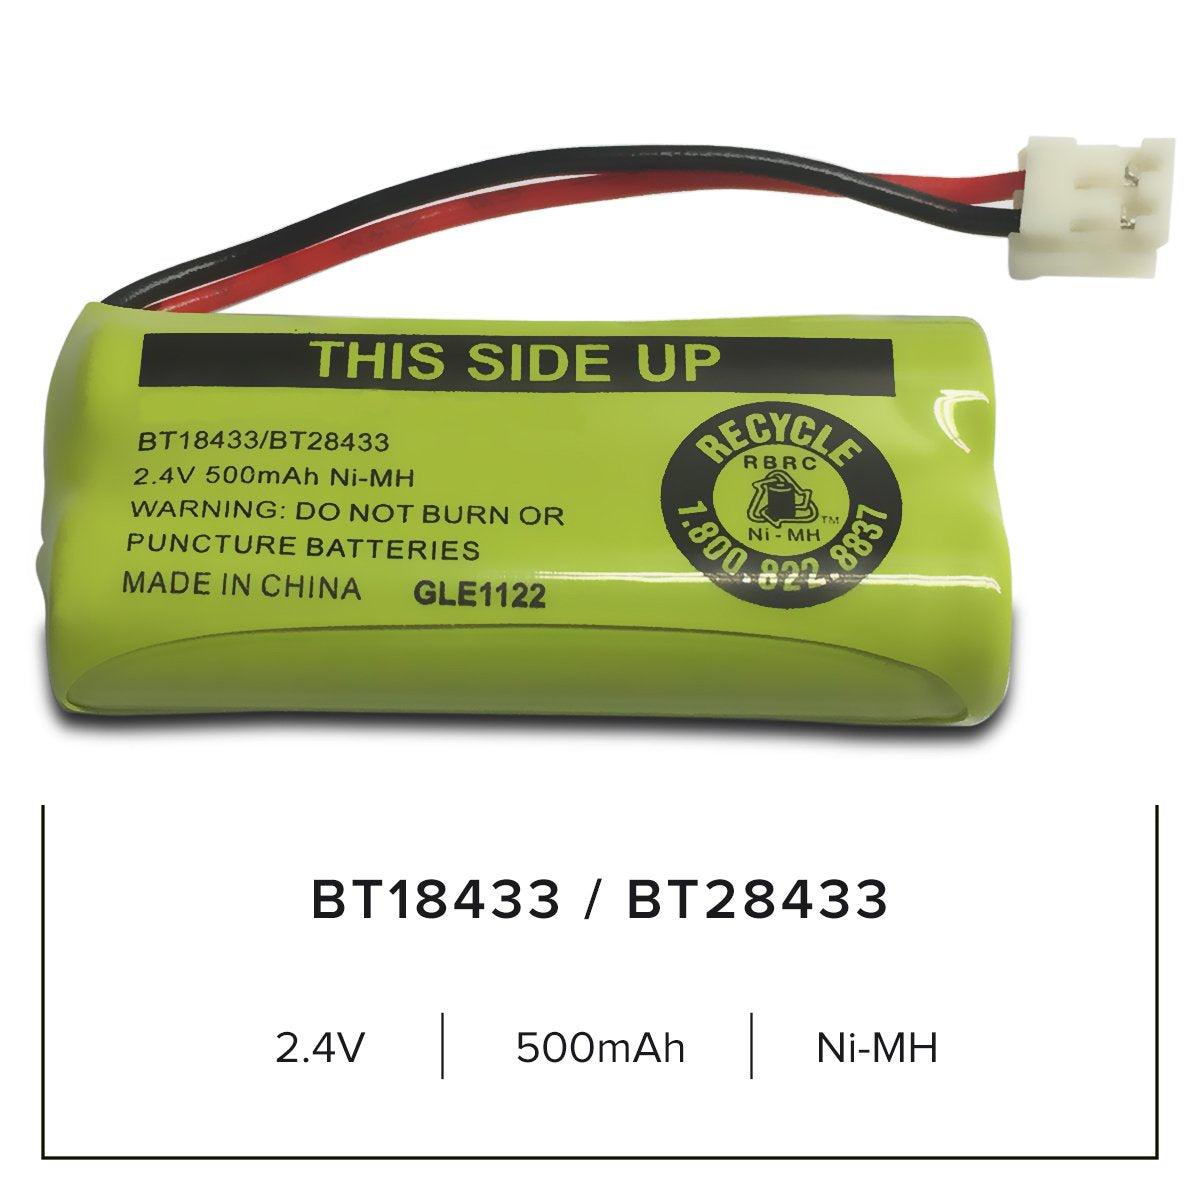 GE 2-5210RE1 Cordless Phone Battery